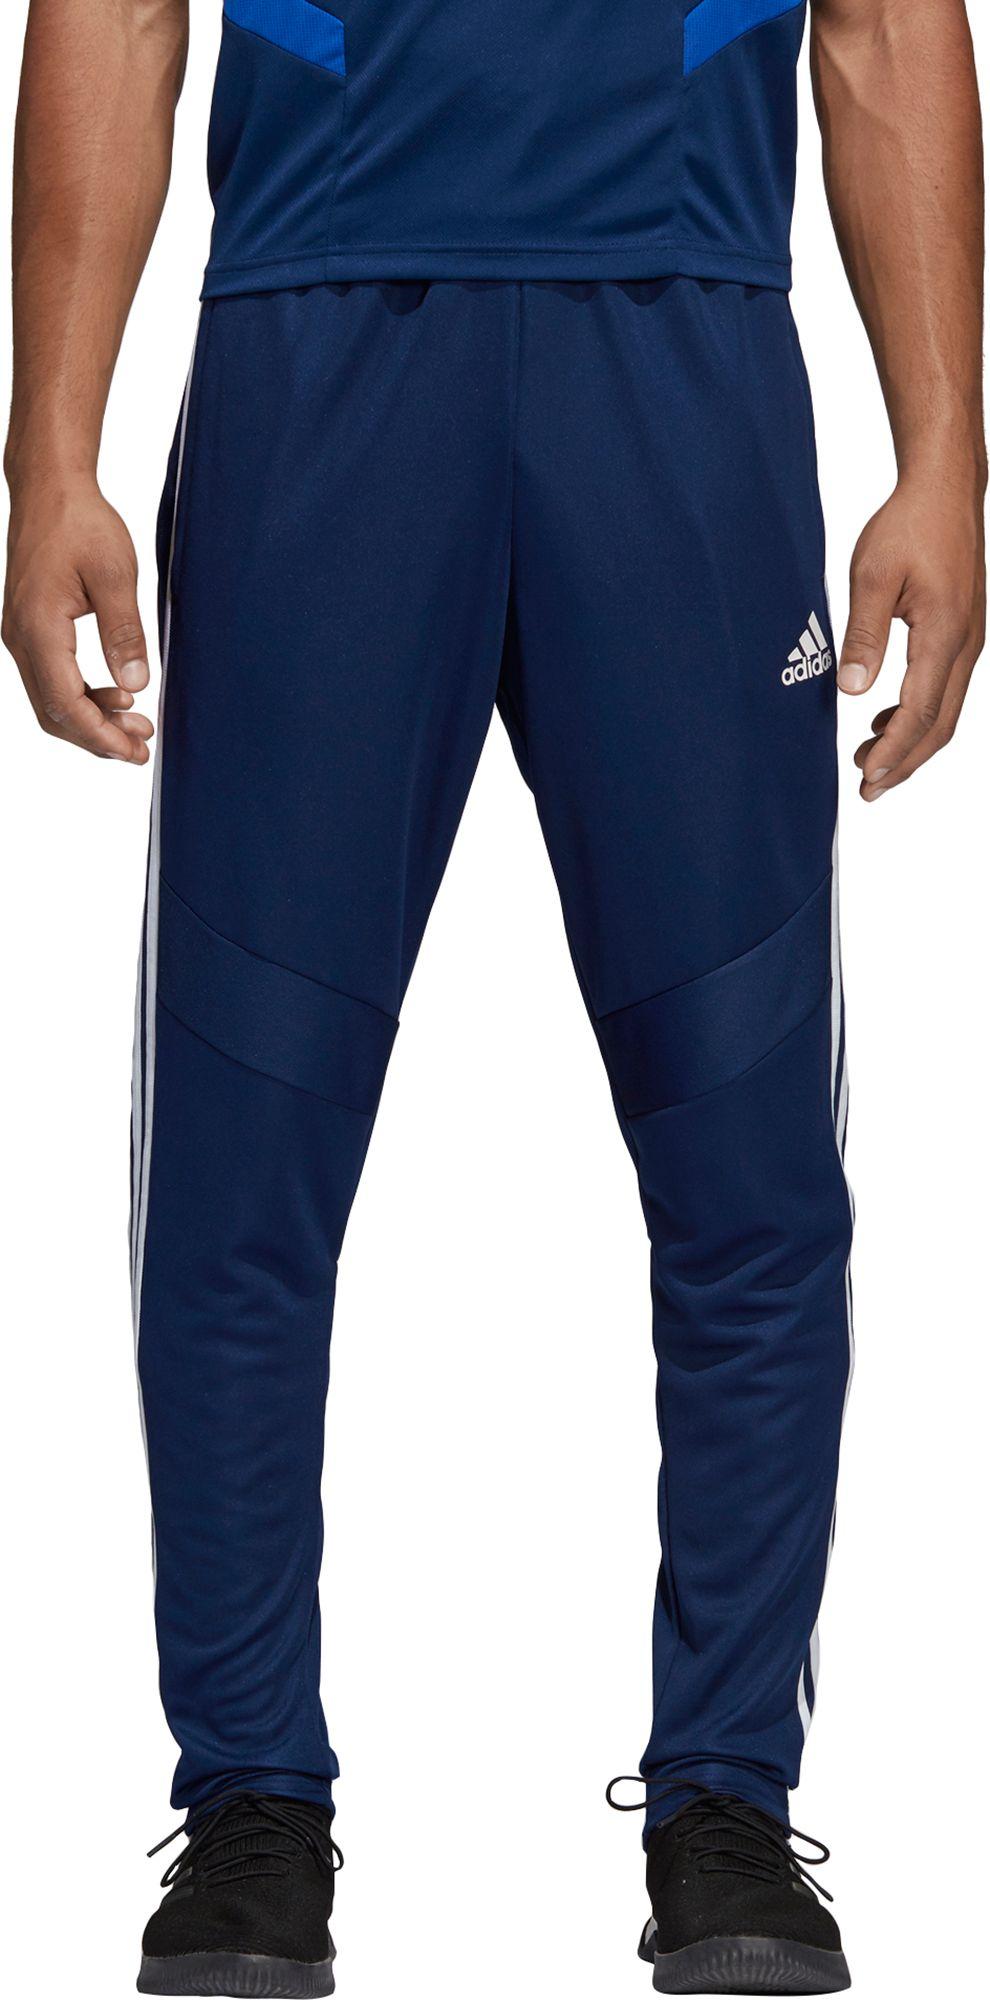 adidas Synthetic Tiro 19 Training Pants in Dark Blue/White (Blue) for